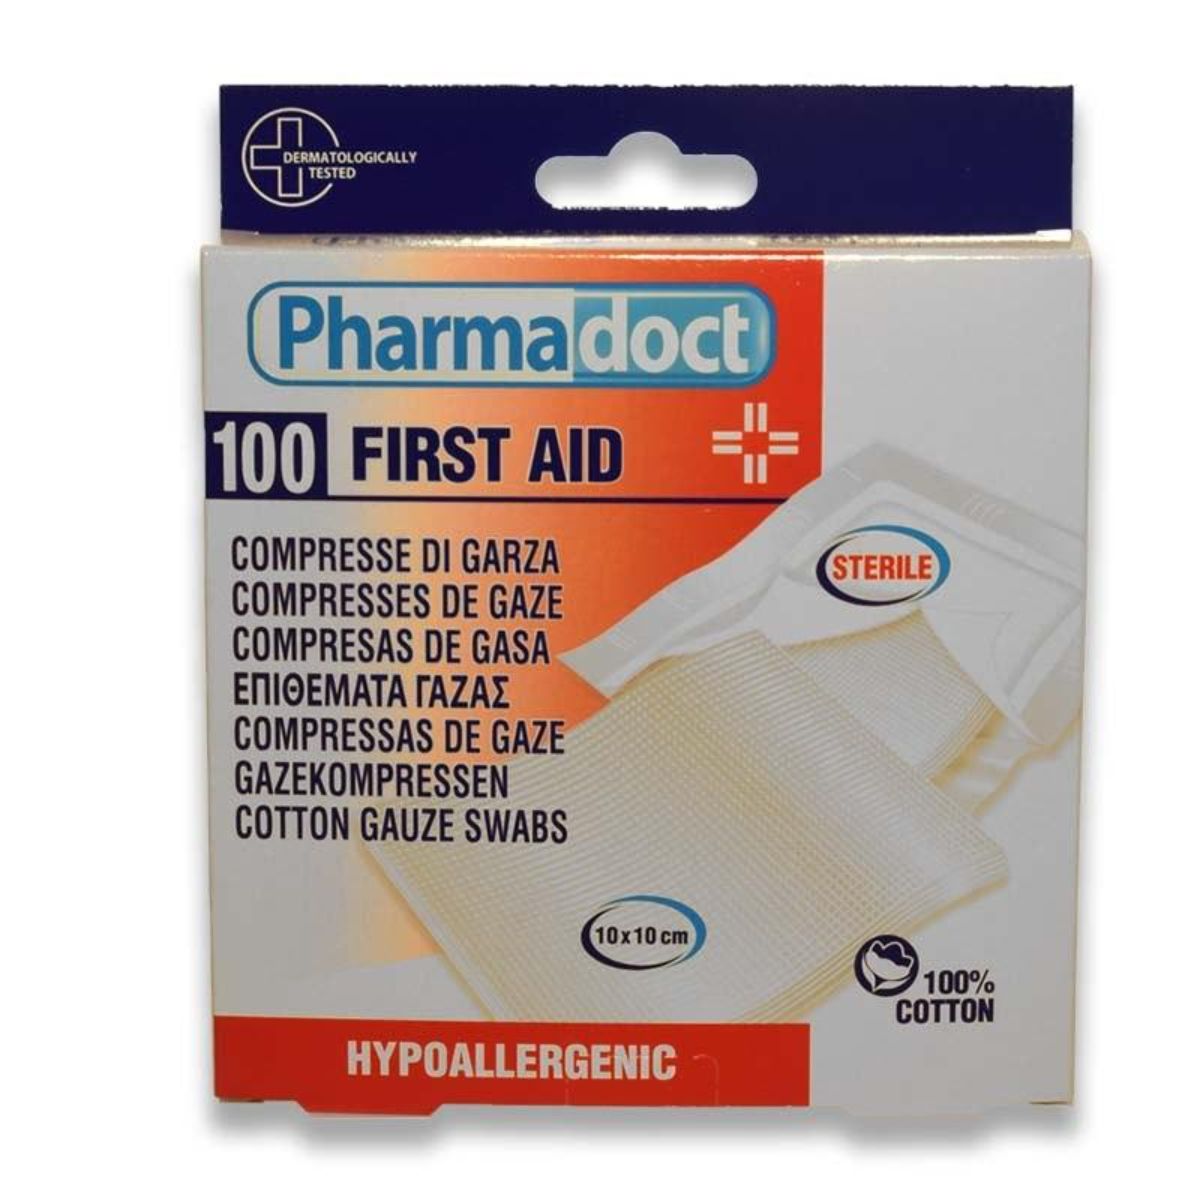 Comprese sterile din bumbac, Pharmadoct First Aid, 100 Buc 10 x 10 cm noriel.ro